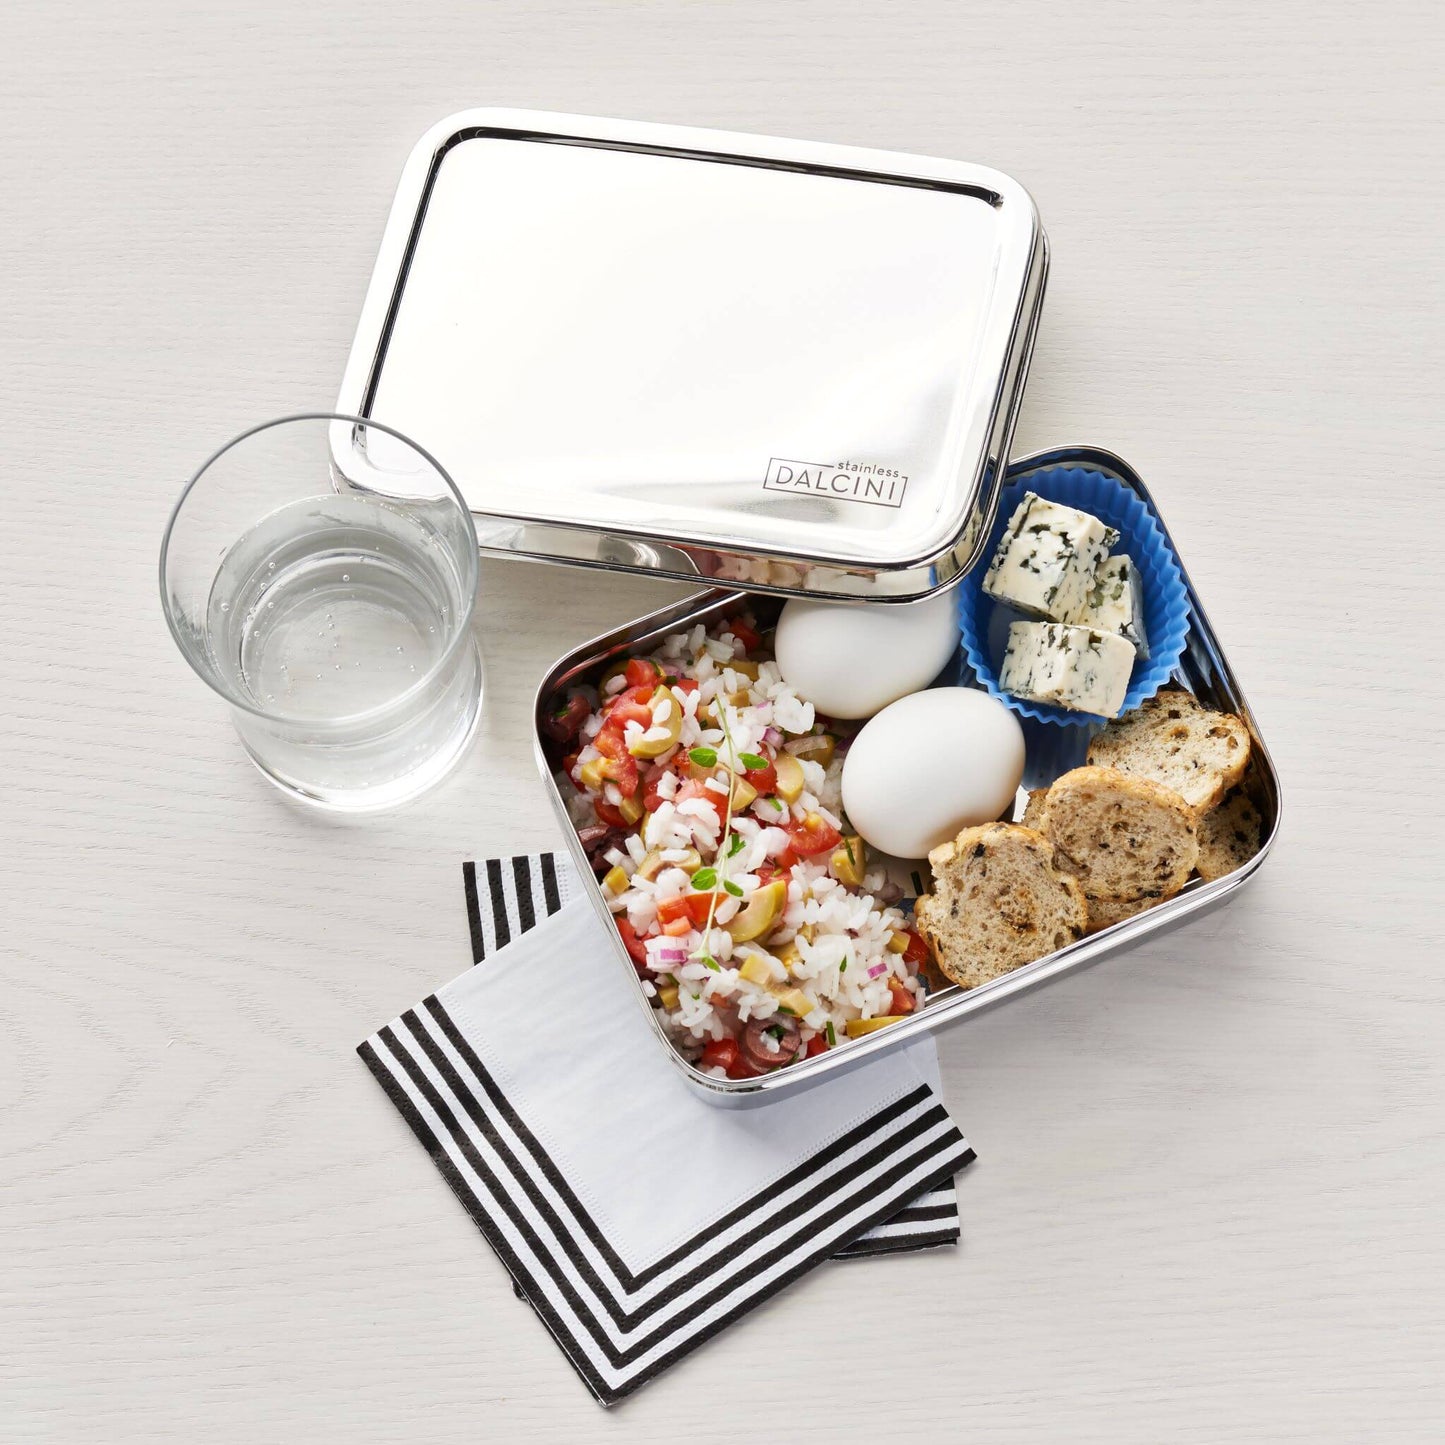 2 hard boiled eggs, crackers, cheese, and rice salad in stainless steel food storage box